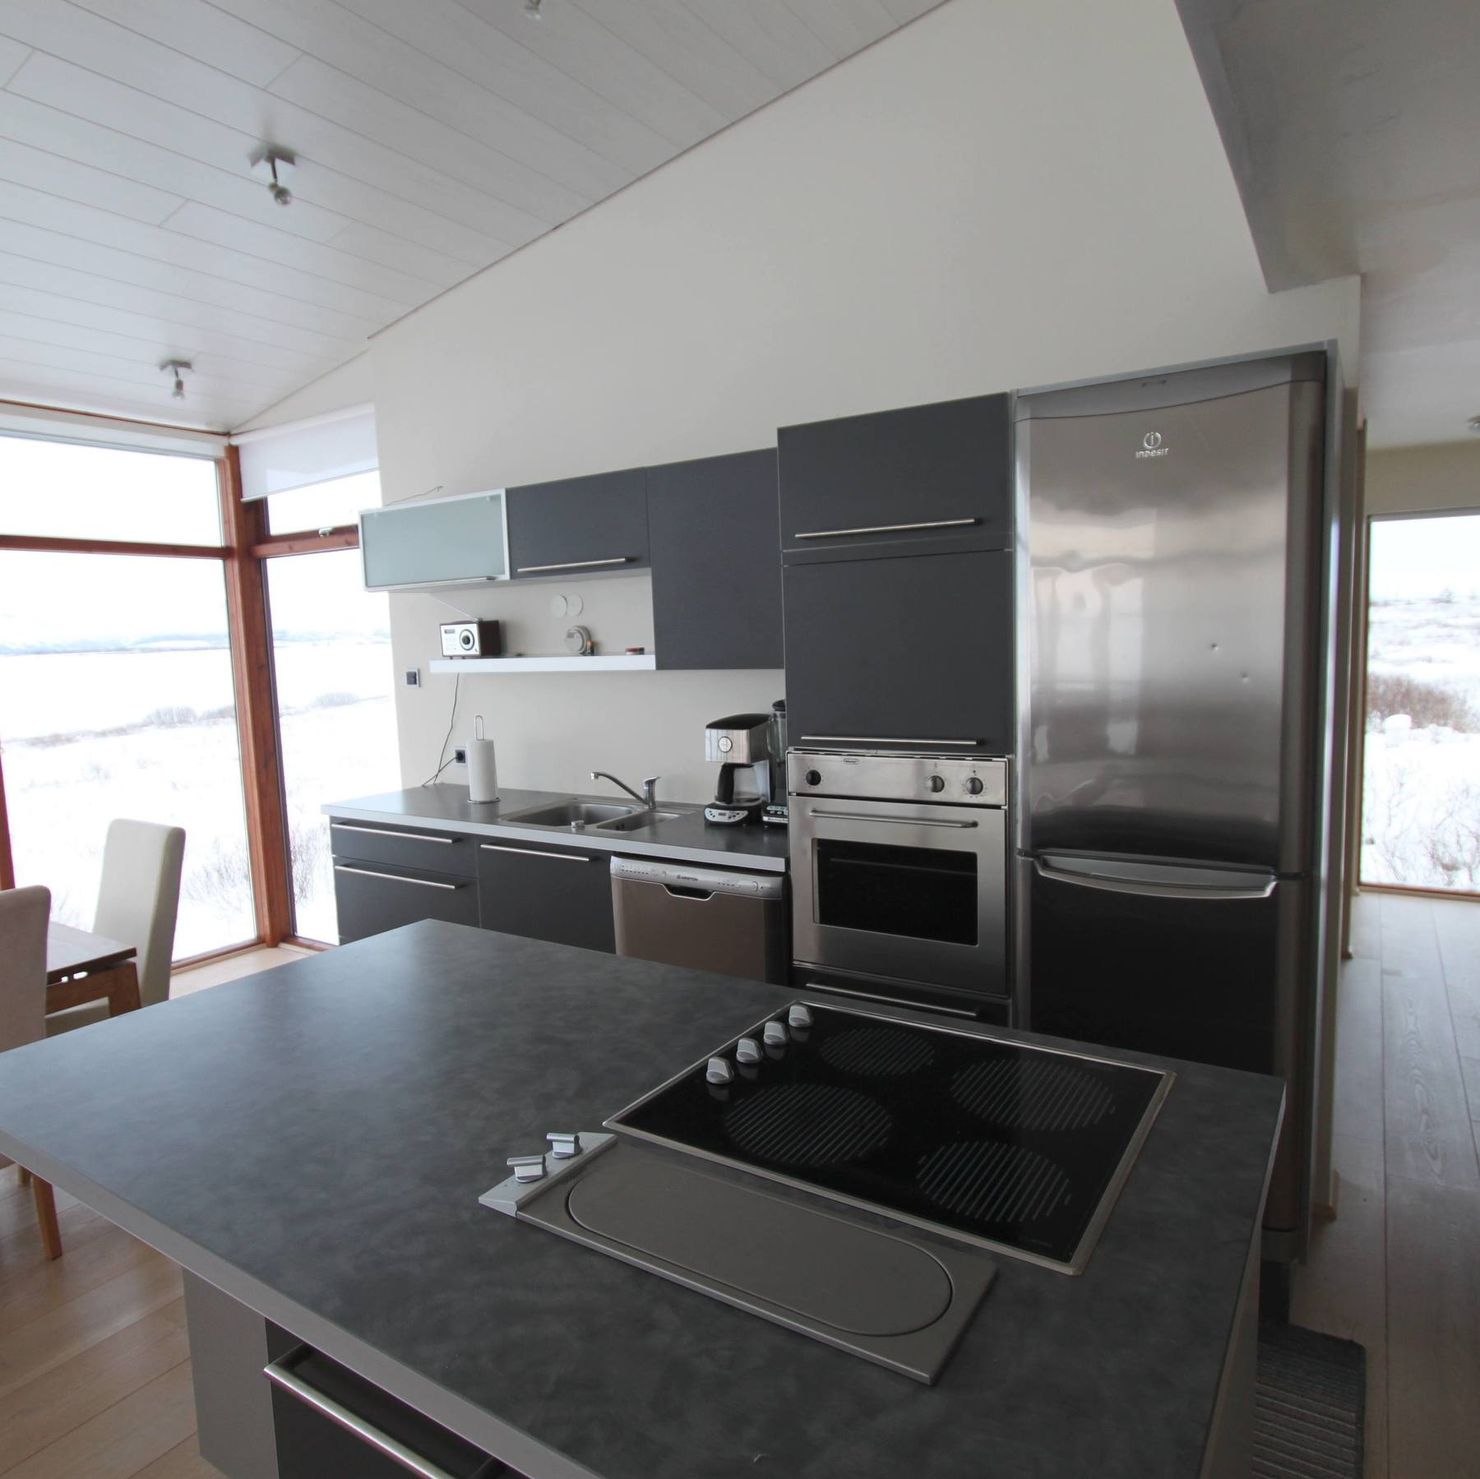 Stylish, open kitchen with large kitchen view and panoramic windows